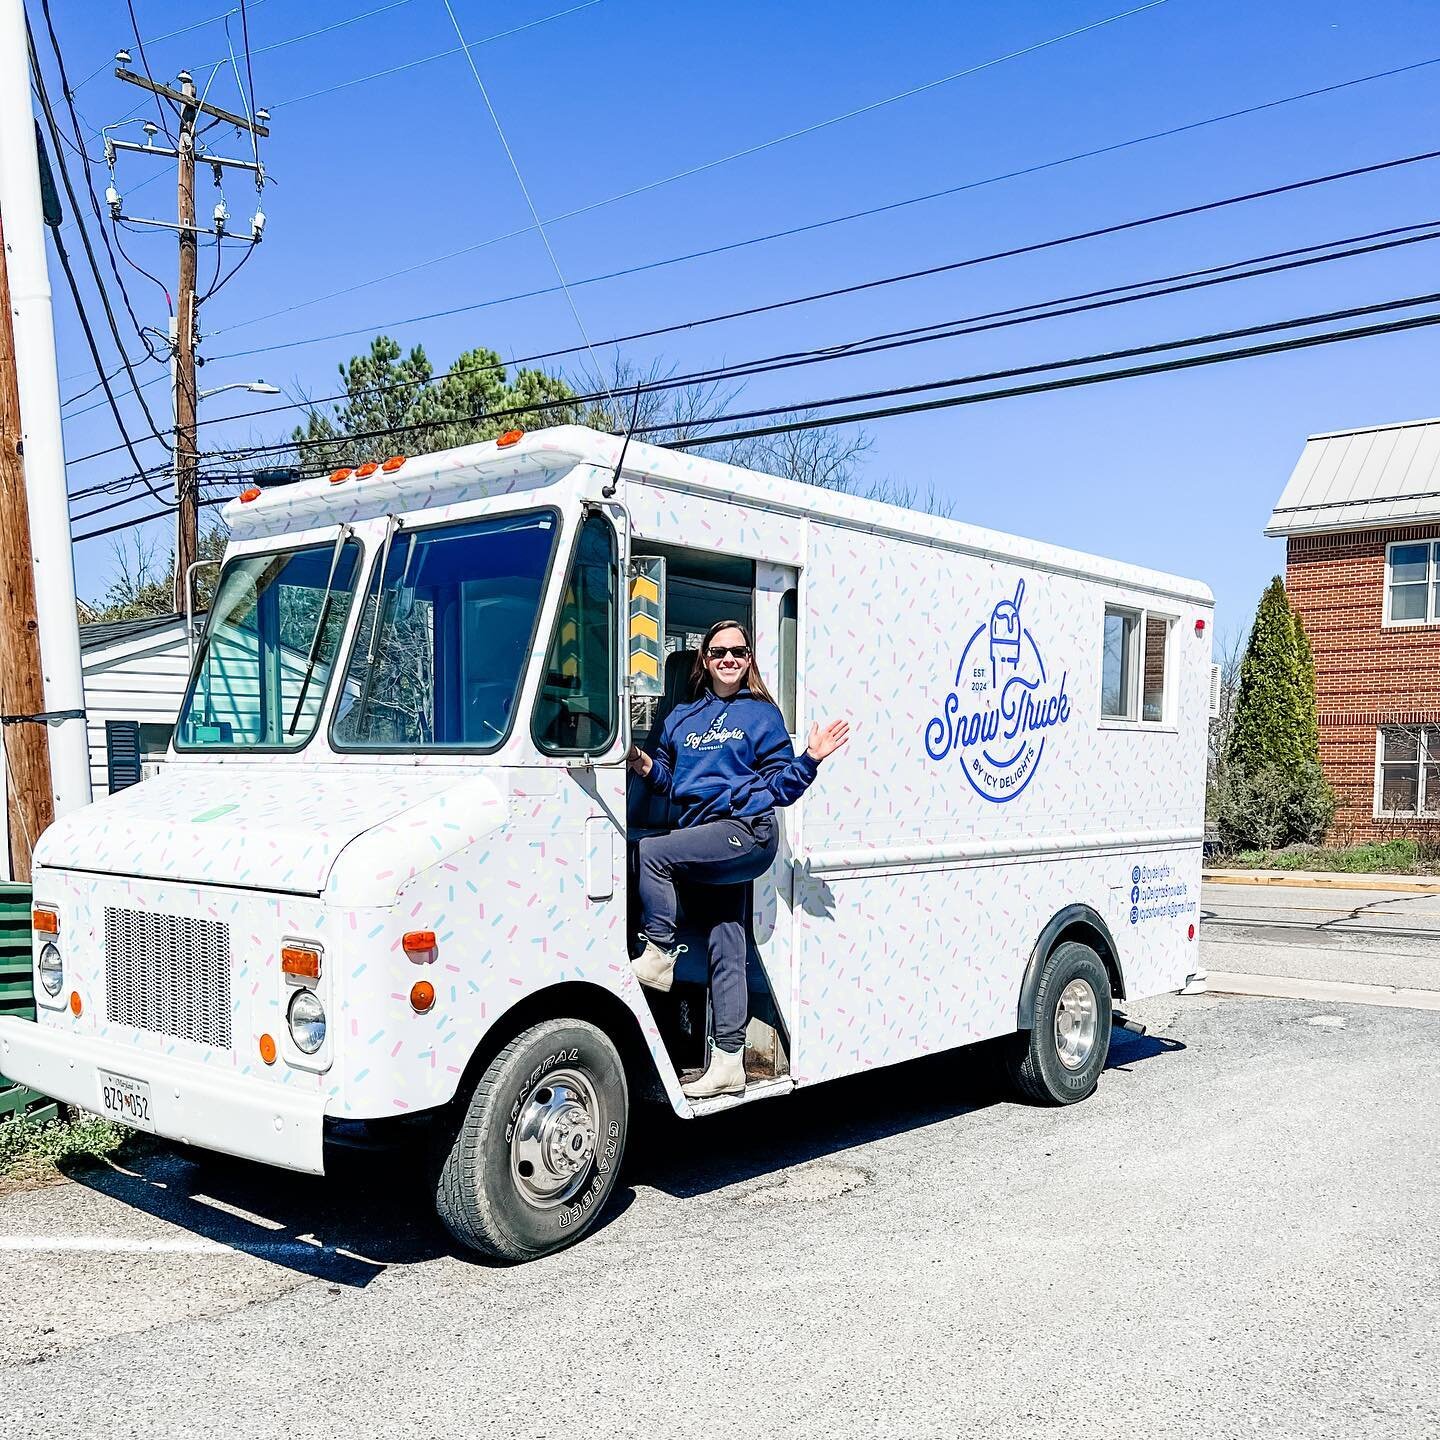 Beep beep! We have news to share! ☀️🛻

Having a party this summer? We&rsquo;ve love to come!! We are officially mobile and ready to serve your guests snowballs at your next birthday party, wedding, BBQ, or other fun event. We can&rsquo;t wait to cel